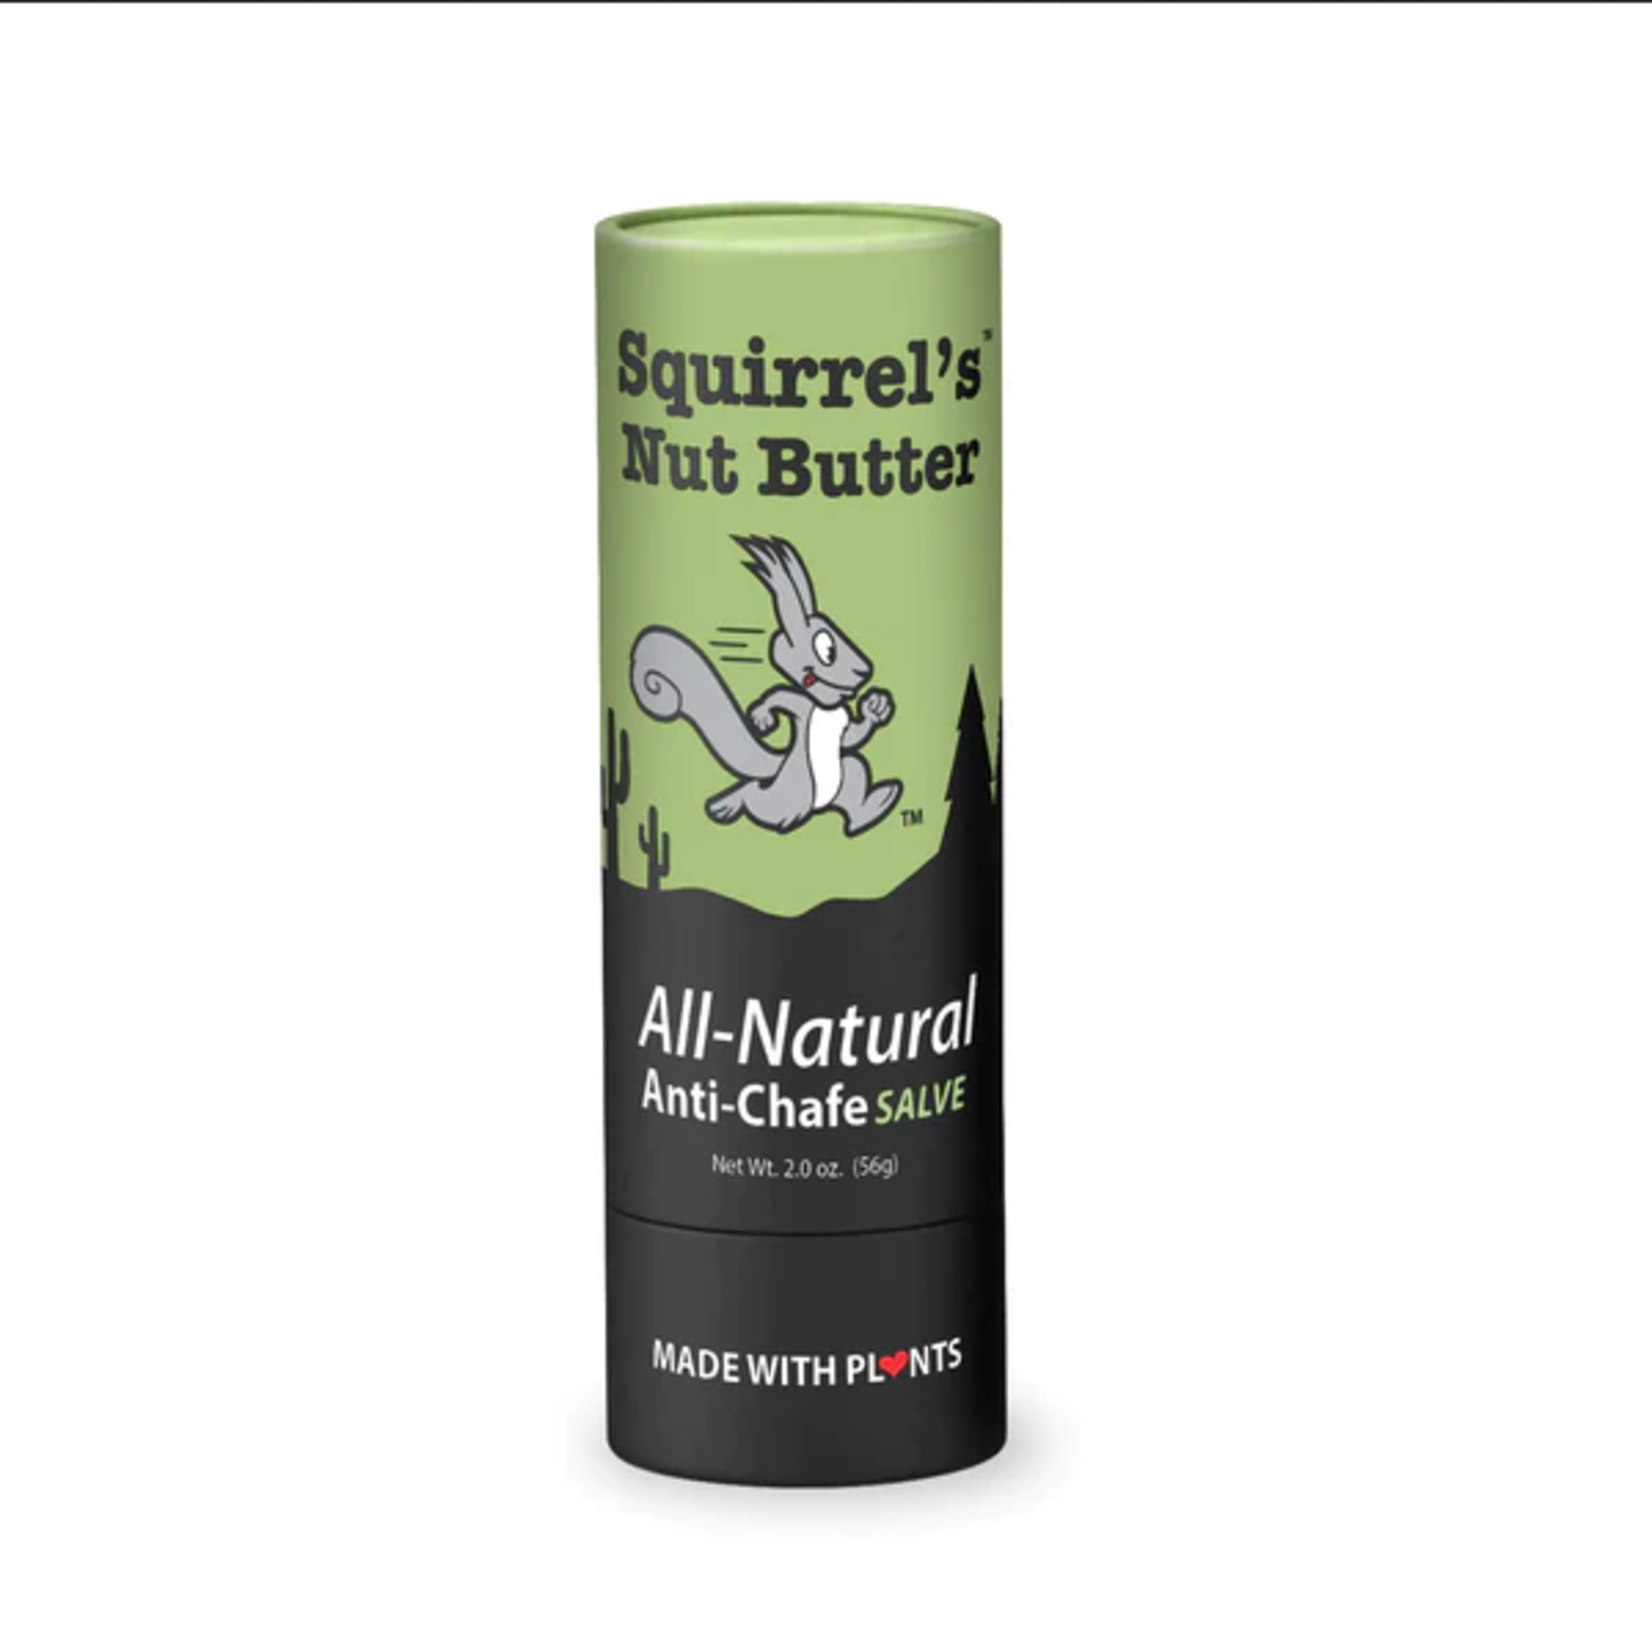 Squirrels Nut Butter SNB Tube anti-chafe 2.0oz